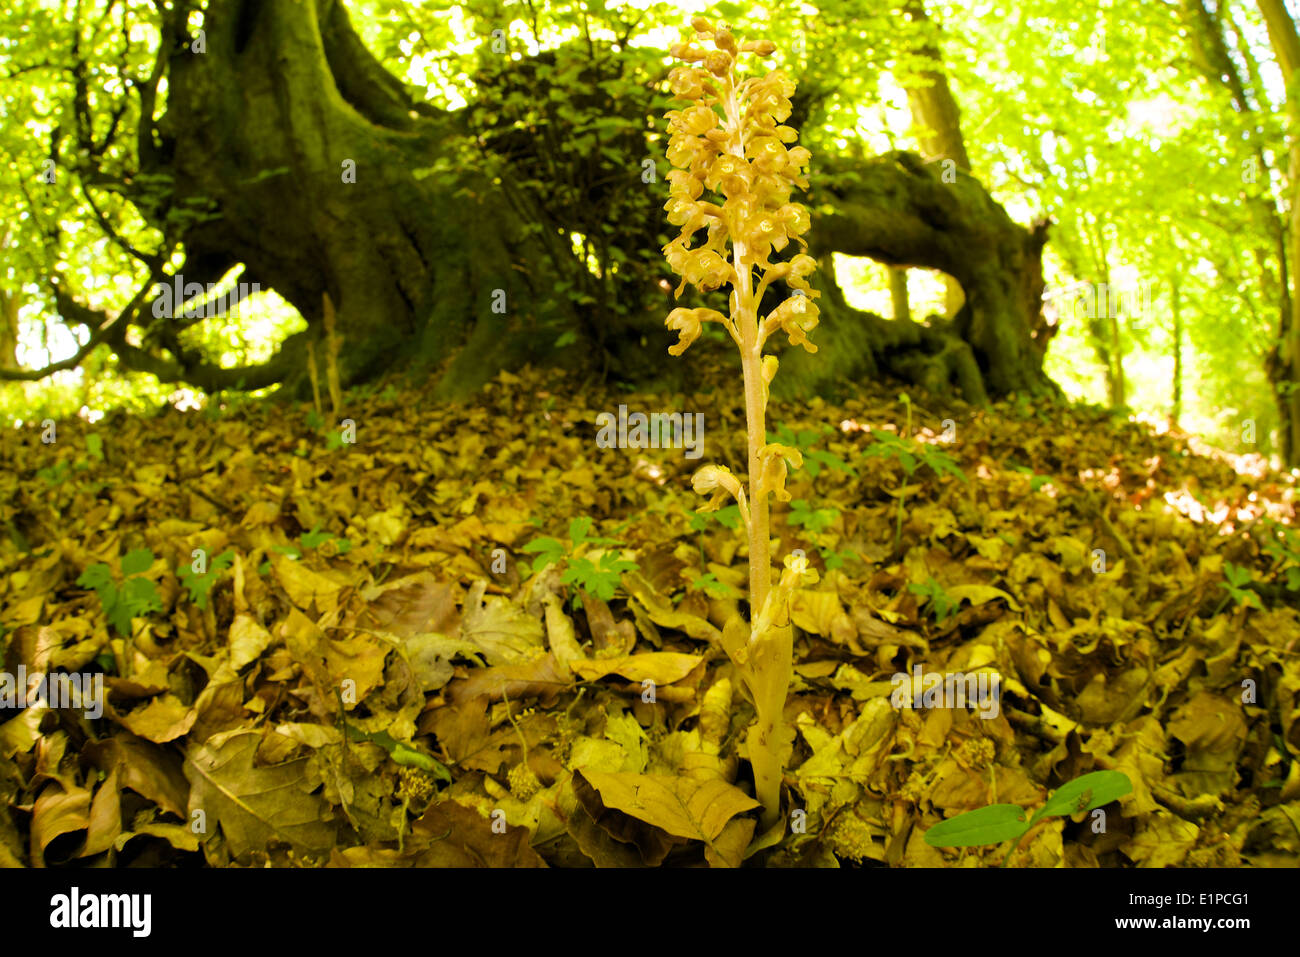 Bird's nest orchid in woodland setting showing shady habitat and ease of overlooking this cryptic species. Stock Photo